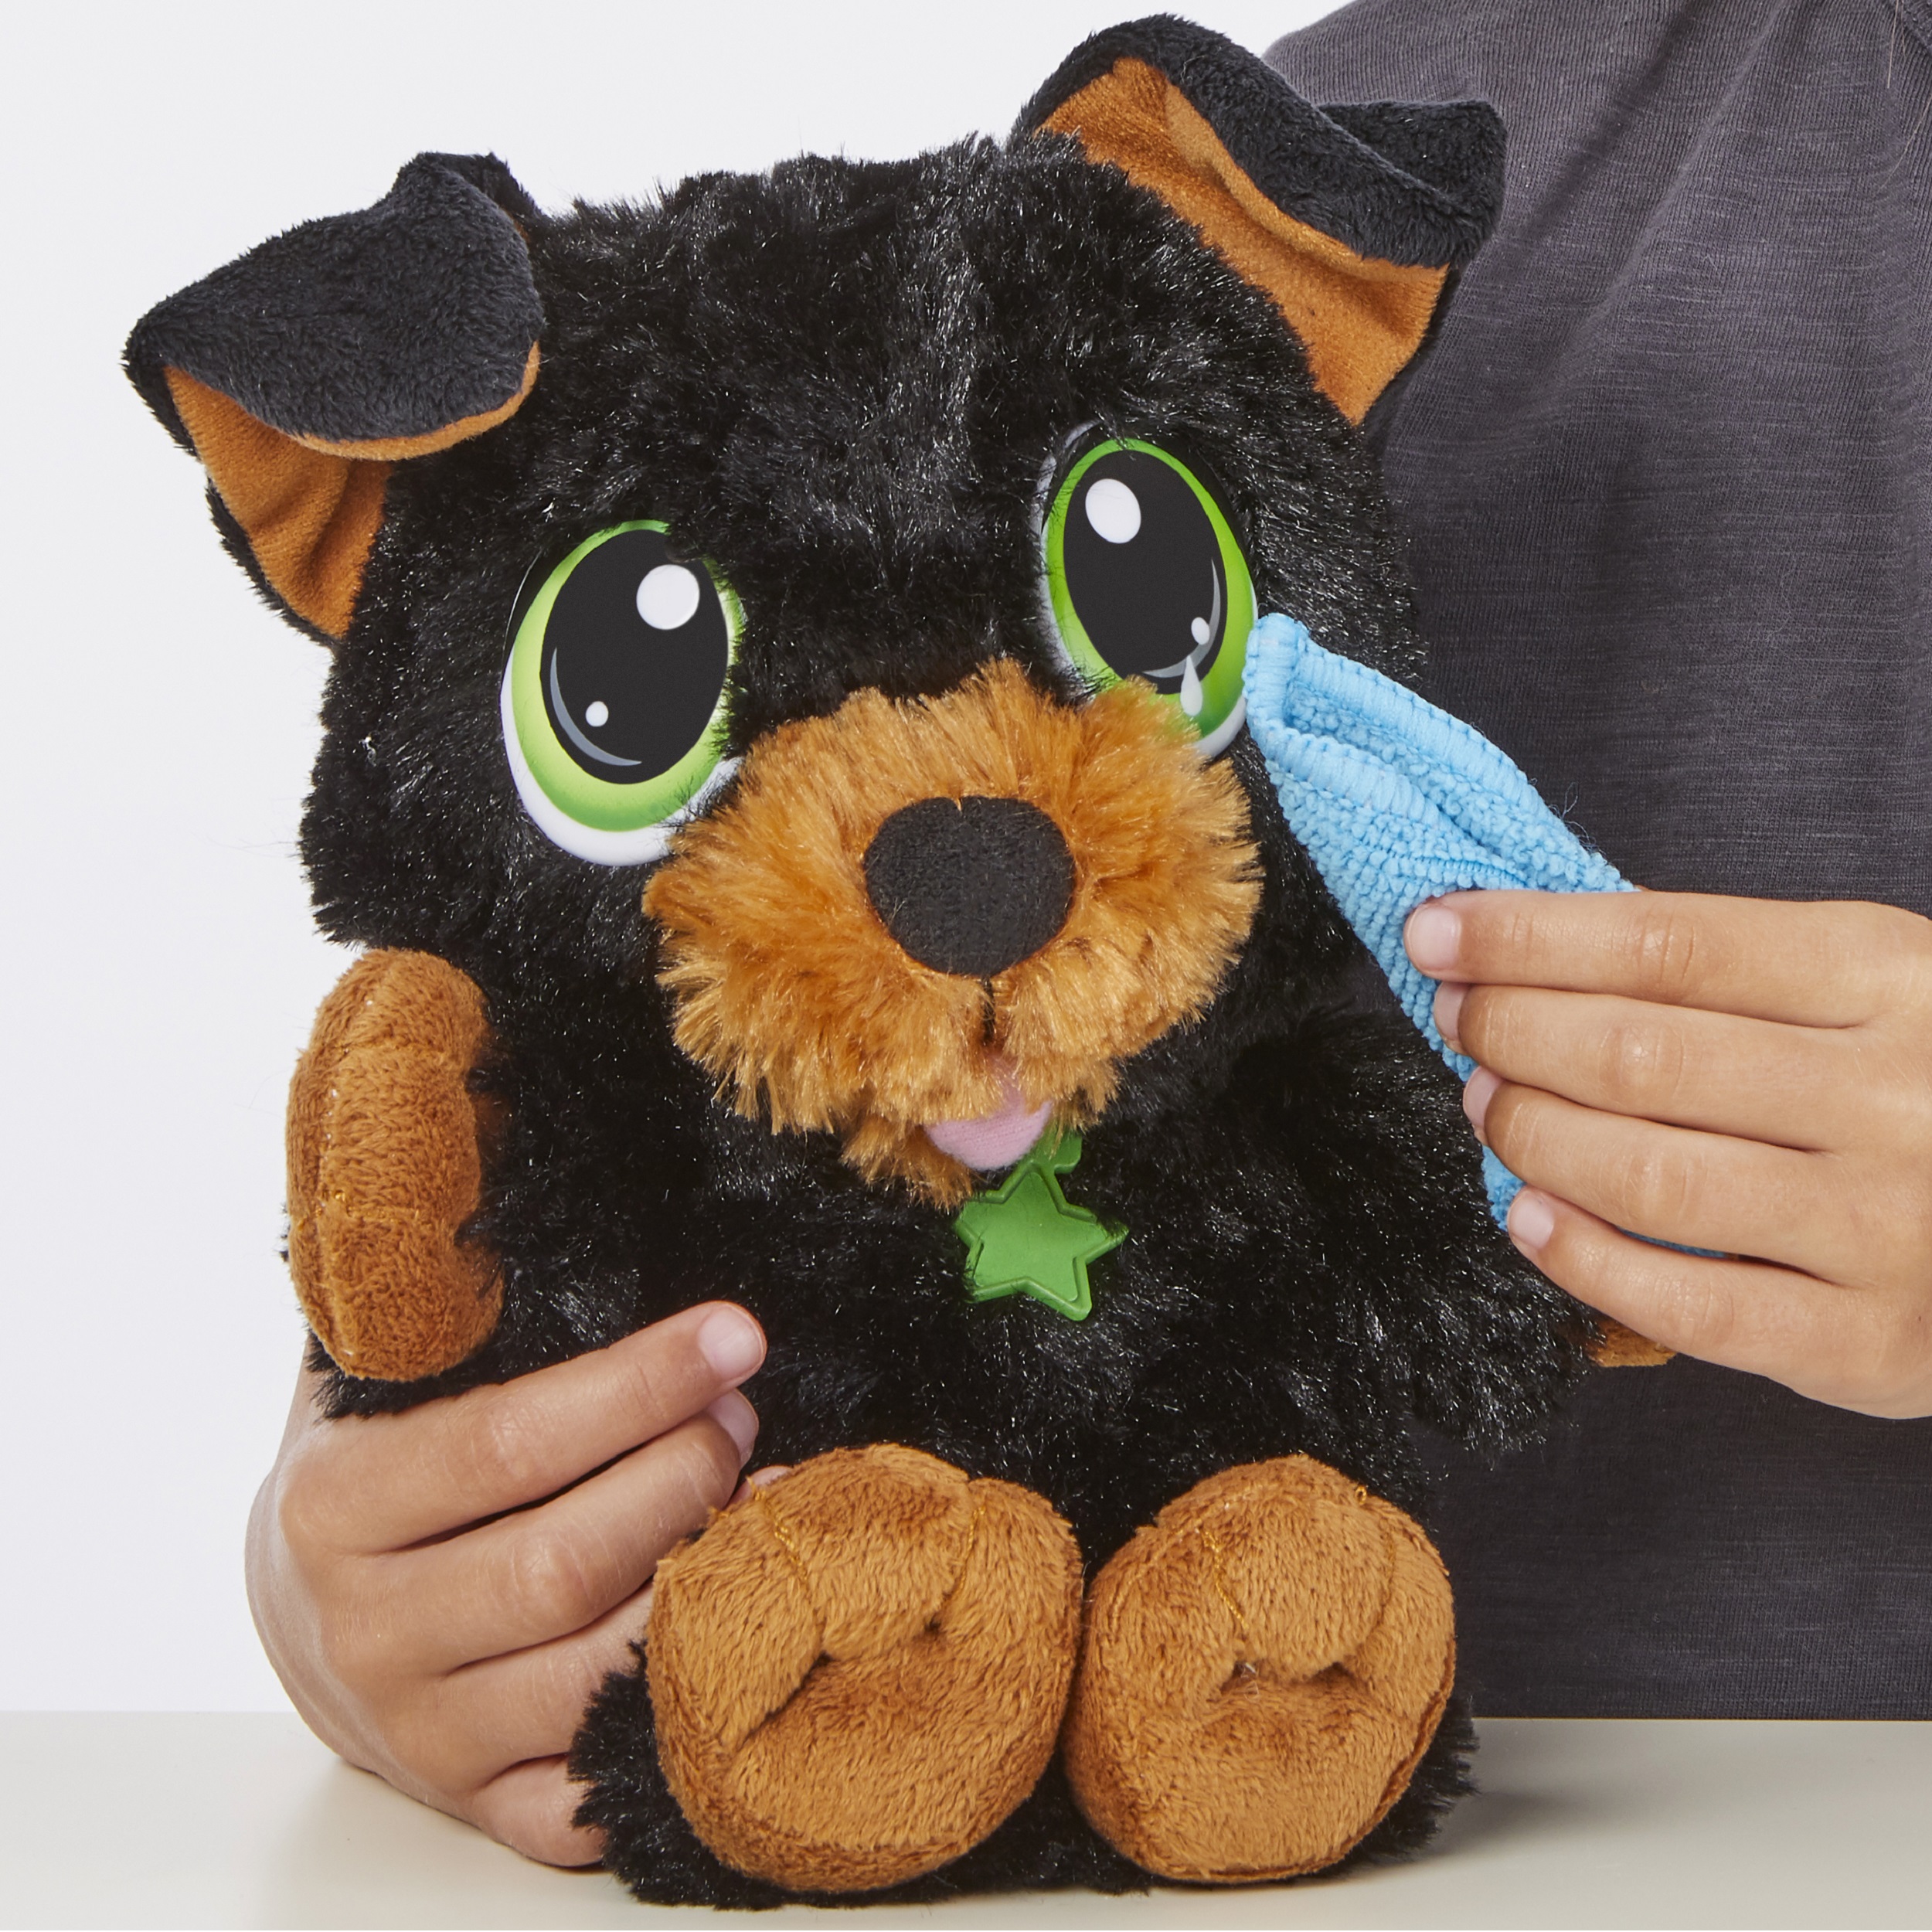 Rescue Tales Cuddly Pup Yorkie Soft Plush Pet Toy - image 4 of 7